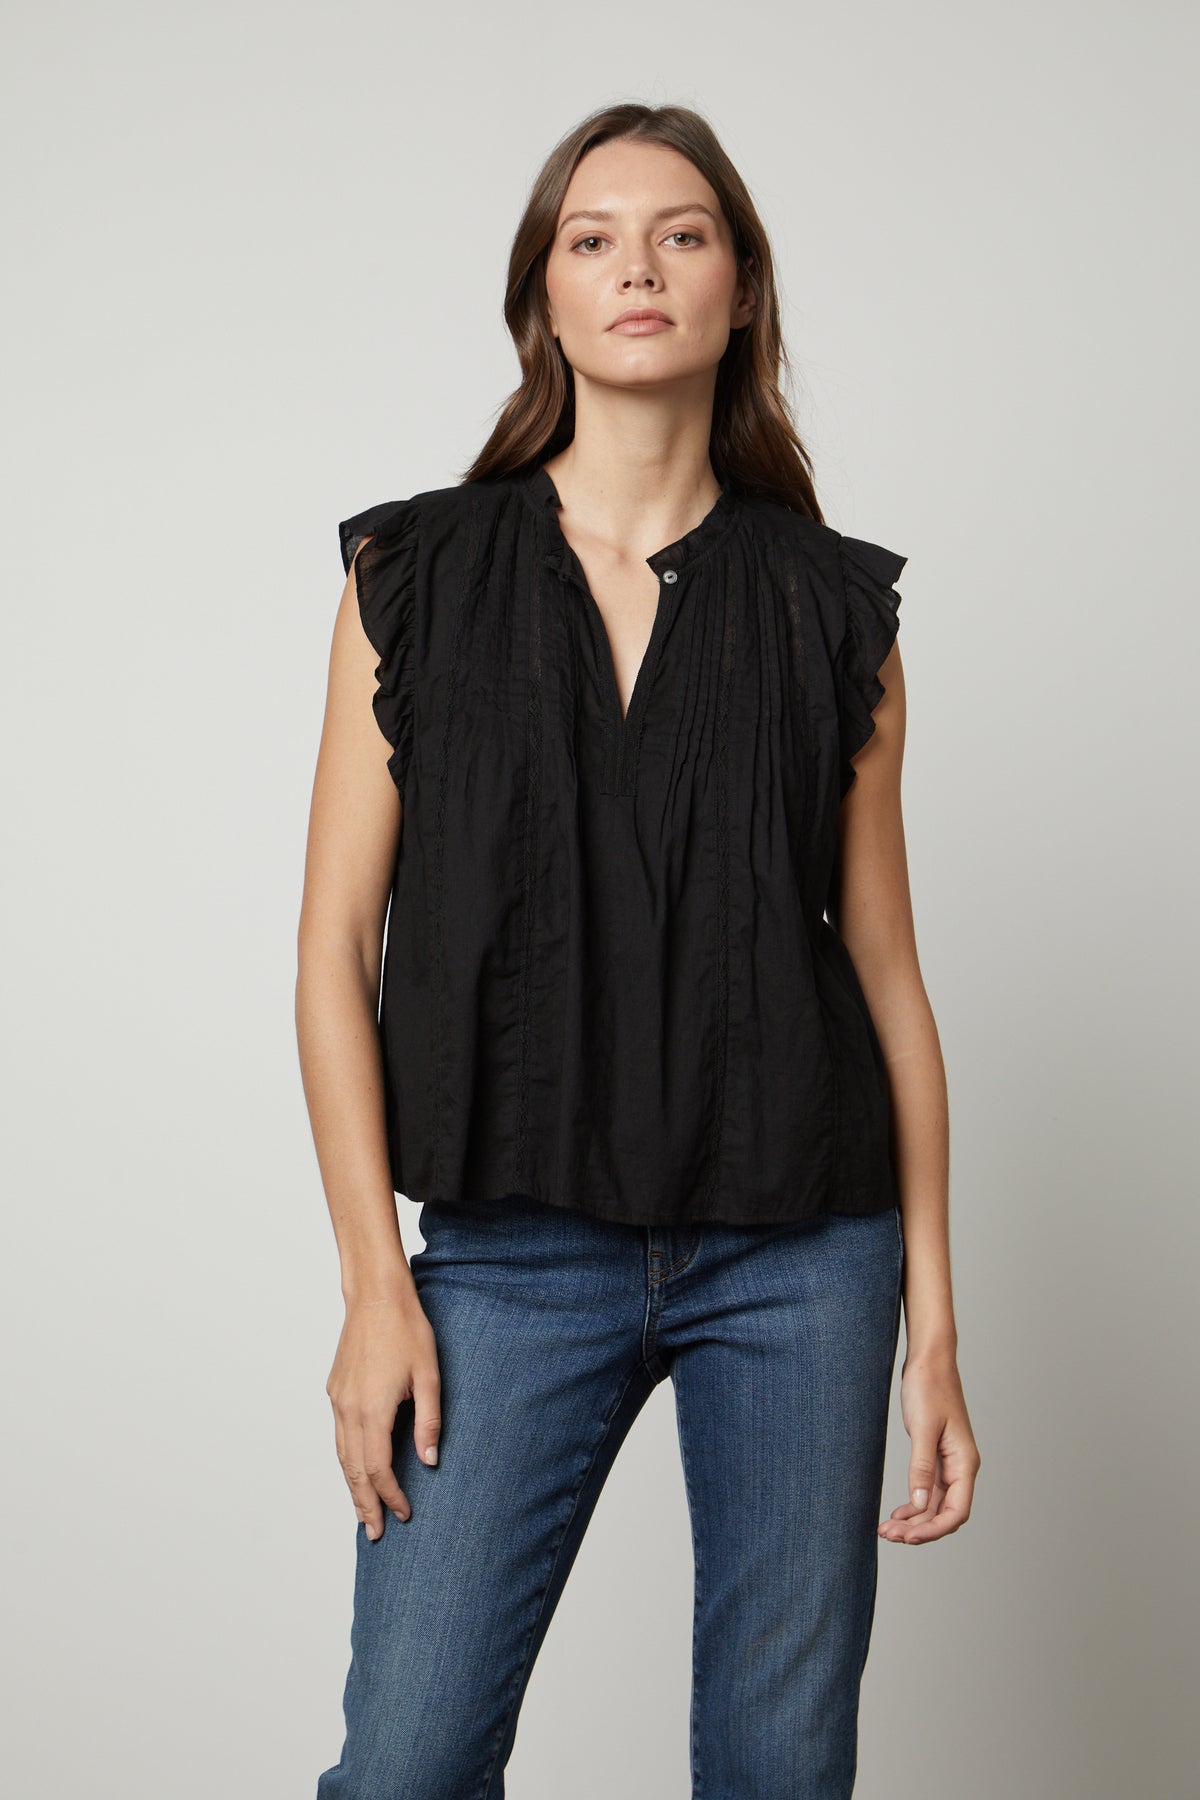   The model is wearing a LIANA LACE TANK TOP by Velvet by Graham & Spencer with ruffled sleeves. 